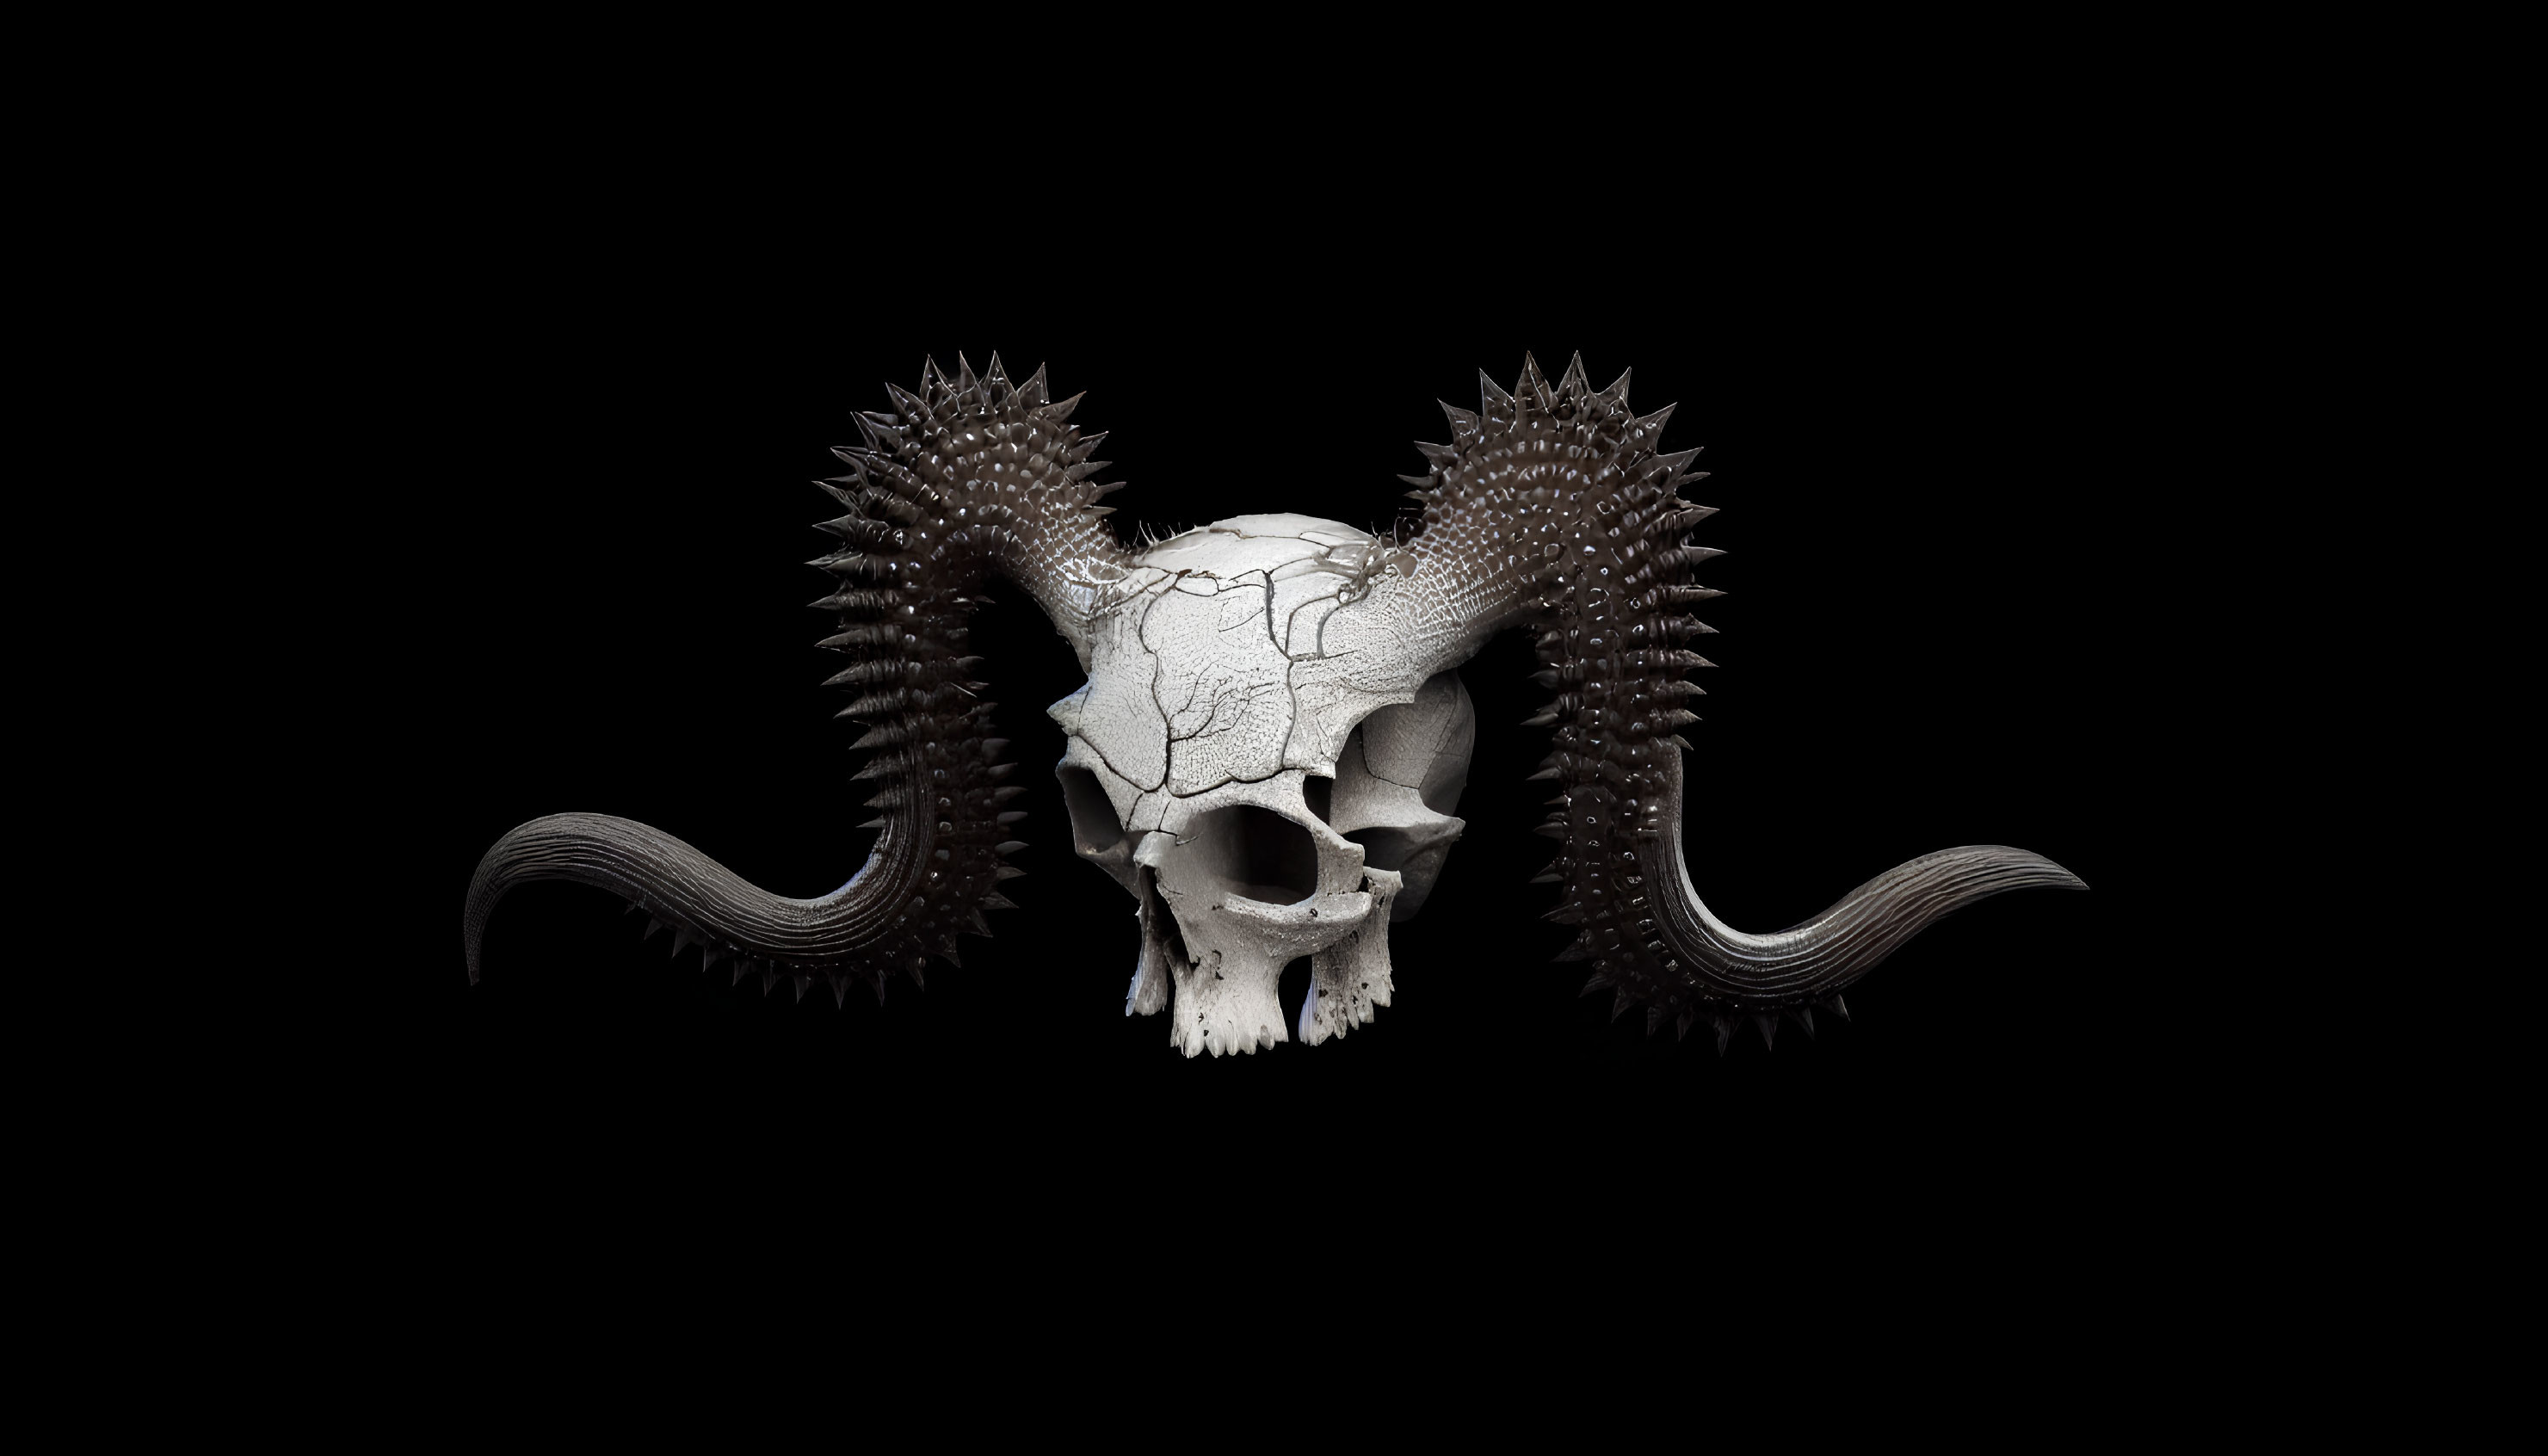 Digital artwork: Cracked skull with horns and tentacles on black background